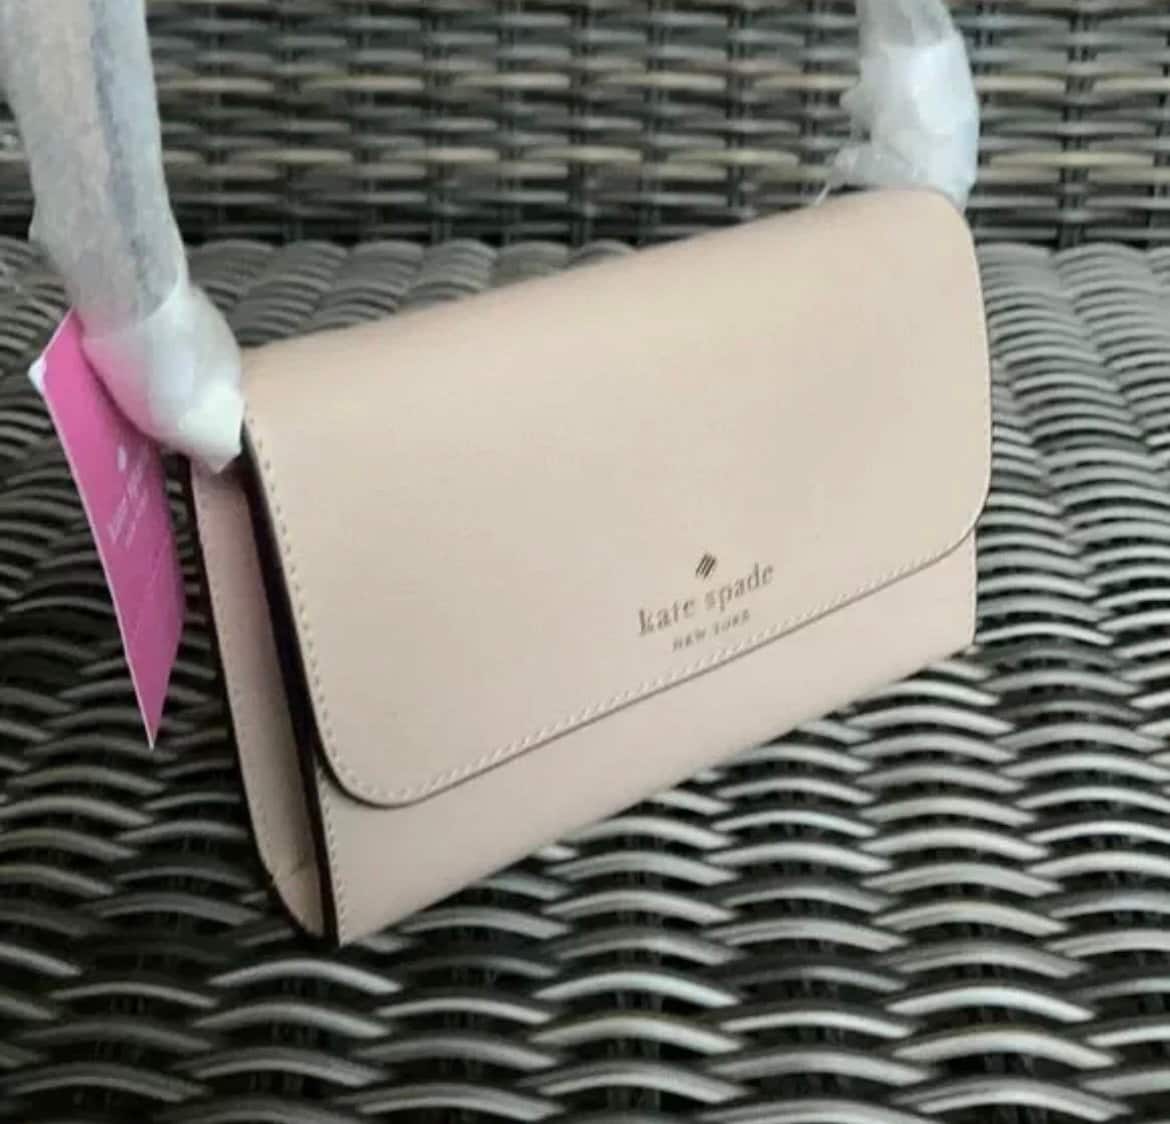 Kate Spade Brynn Small Flap Crossbody Only $59 (Reg. $259), Shipped ~ TODAY  ONLY